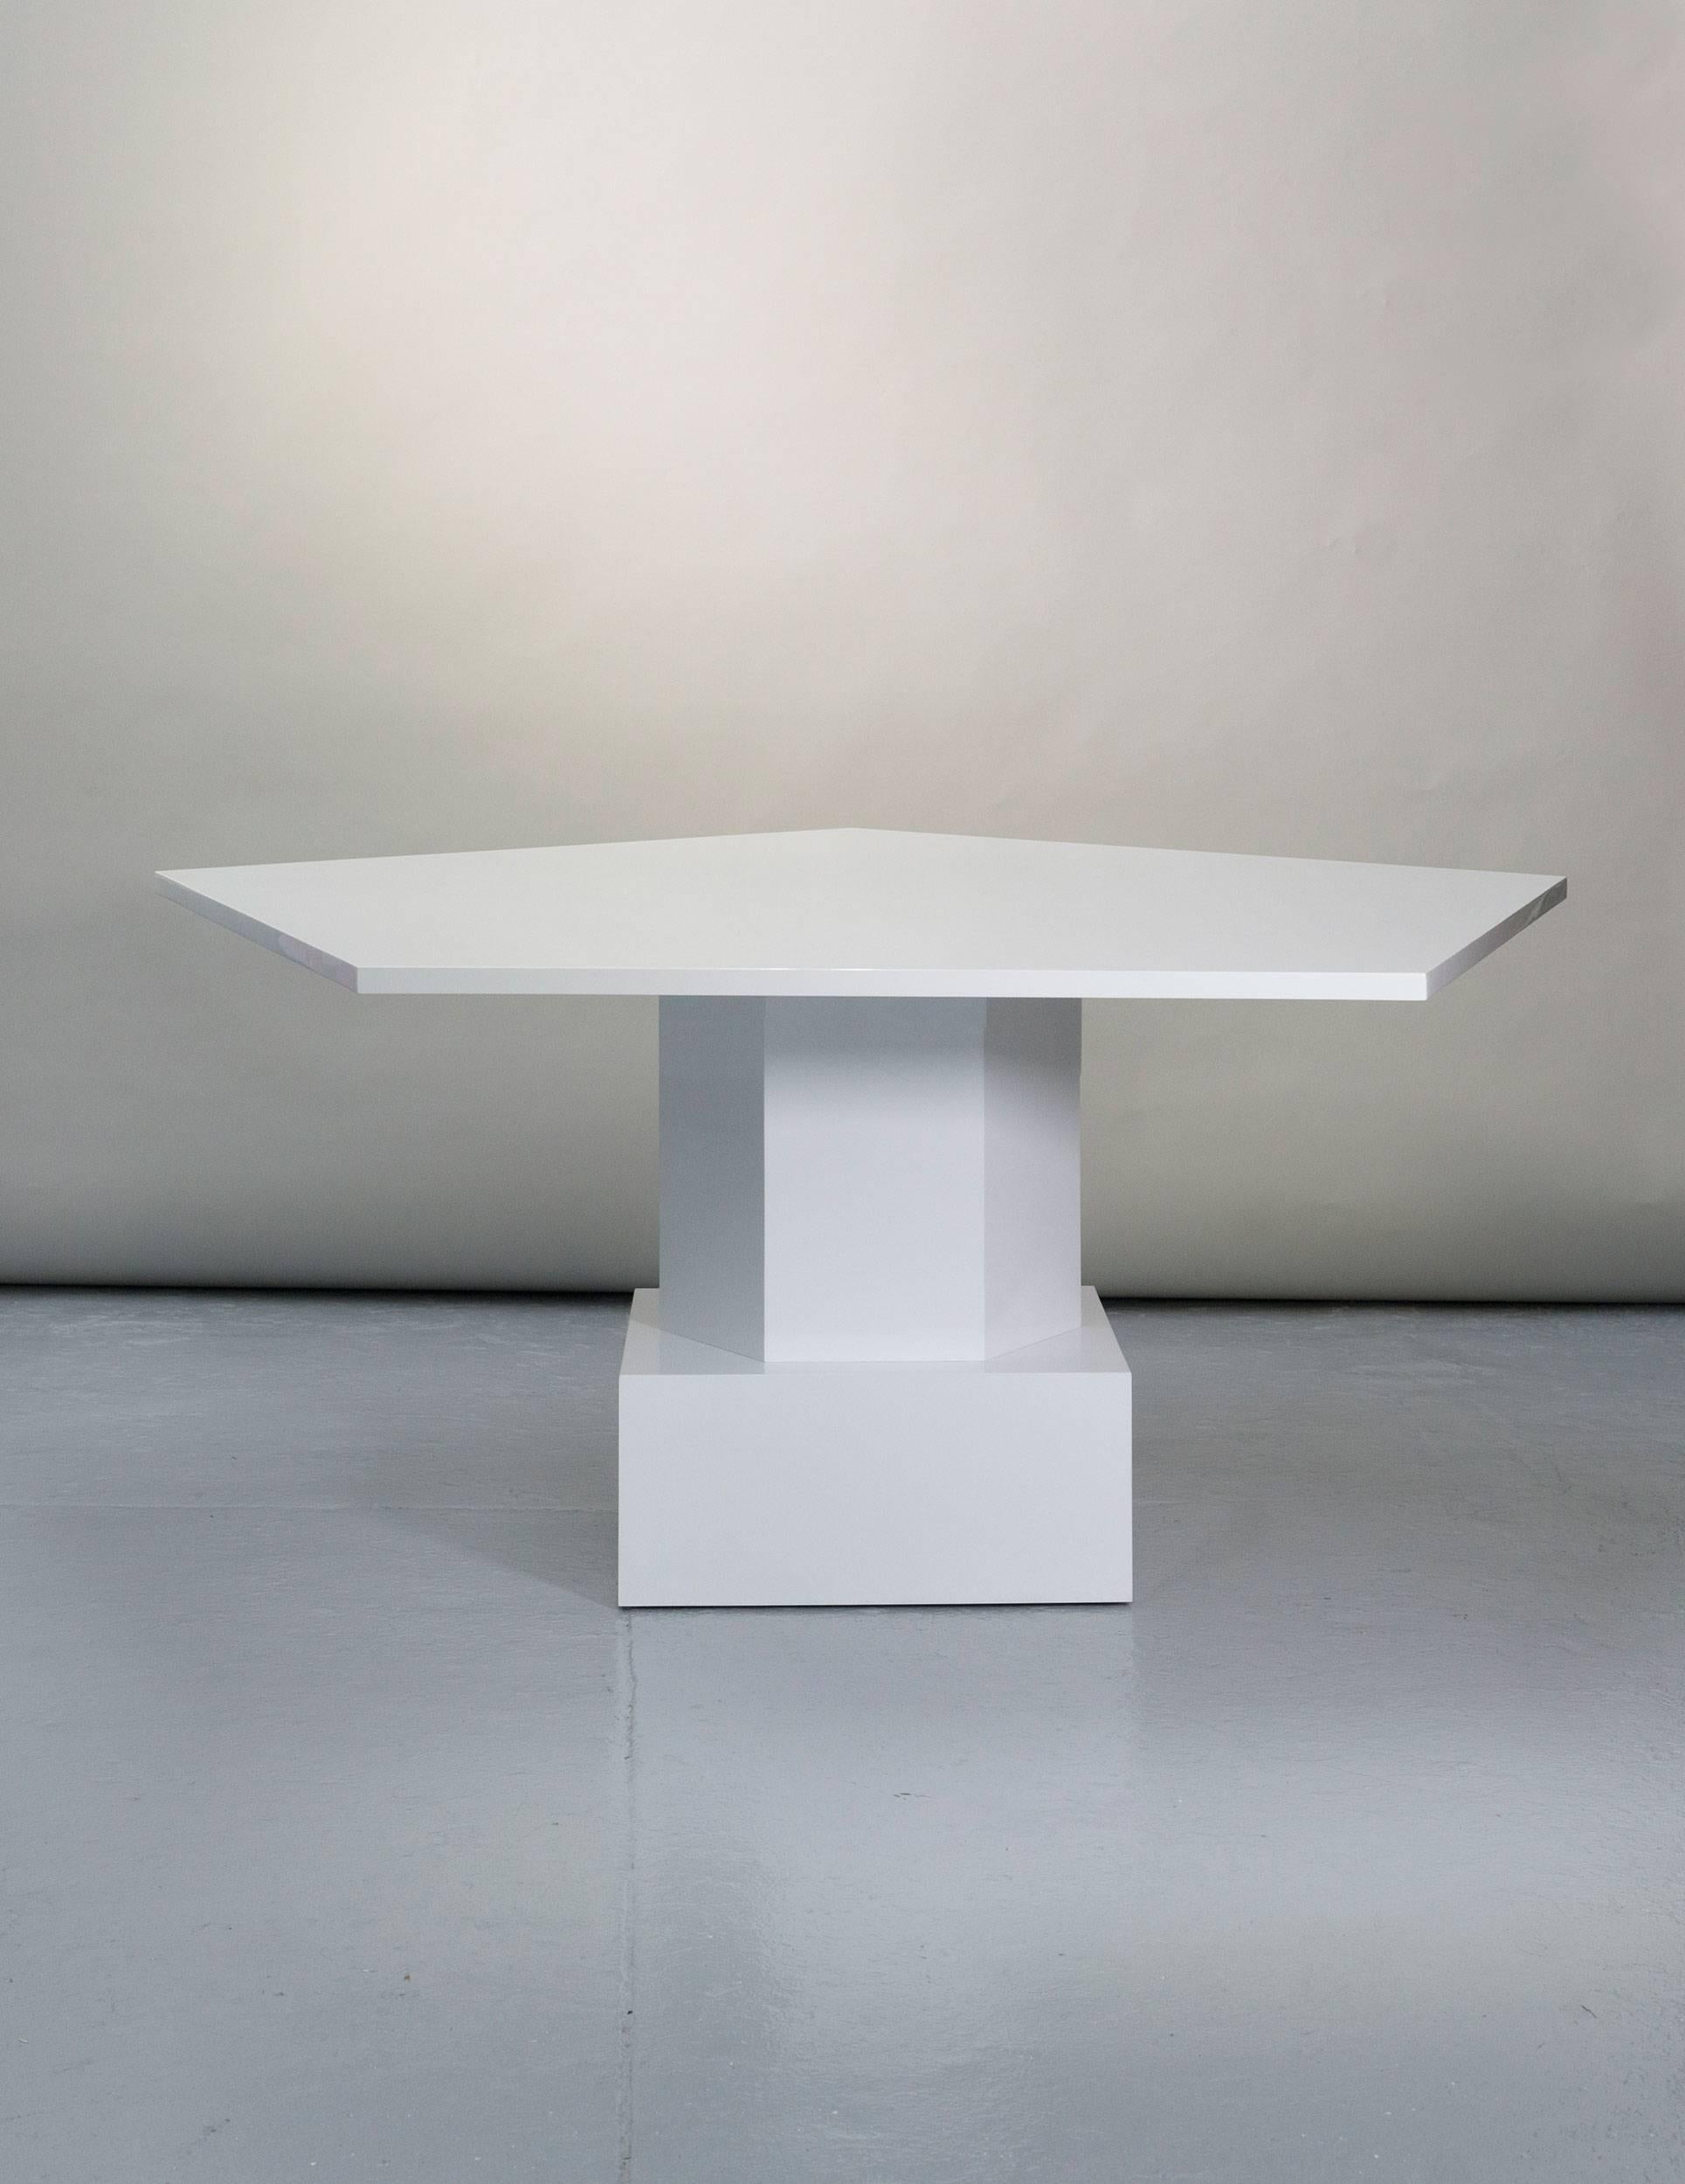 A stunning dining table by Tinatin Kilaberidze who finds inspiration in geometric forms. The designer chose a white lacquer for this pentagonal shaped dining or centre table that can be used alone or paired with another in walnut to seat over ten